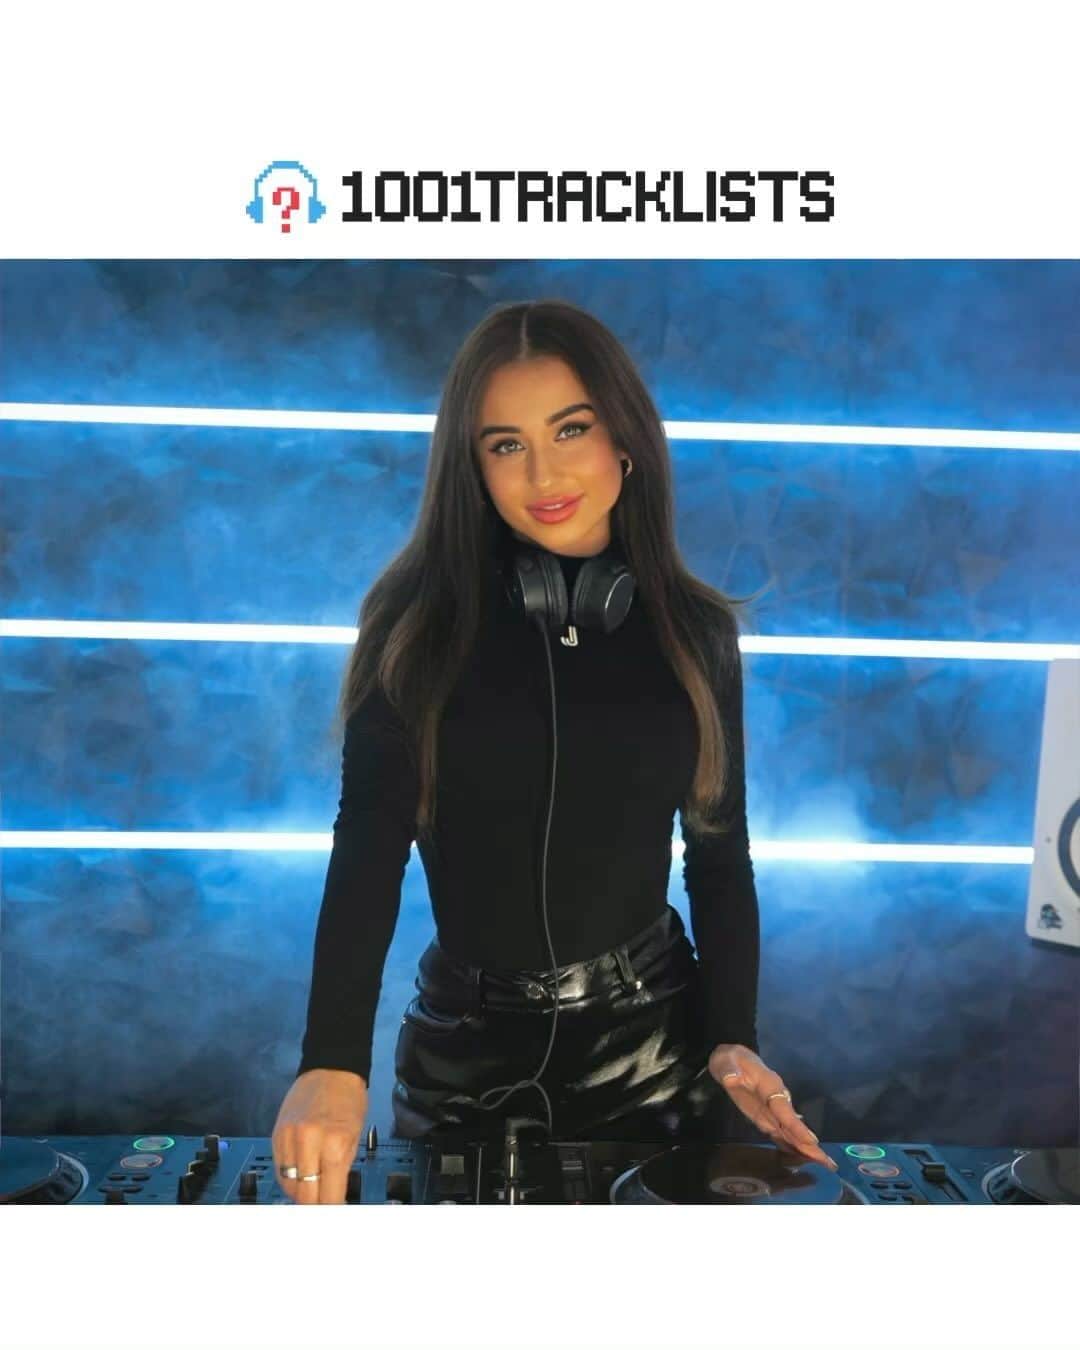 JUICY Mのインスタグラム：「Choose your favorite (1-9) 👇 @djjuicym dishing out the hottest tech house and house heaters live from the studio in her newest Exclusive Mix for @1001tracklists 🎉🪩  Watch the full set on our YouTube channel, link in bio 📺   Track IDs are pinned in the comments below 📌 Follow @1001tracklists for more of the freshest dance music daily!  #juicym #techhouse #techhousemusic #techhousedj #housemusic」